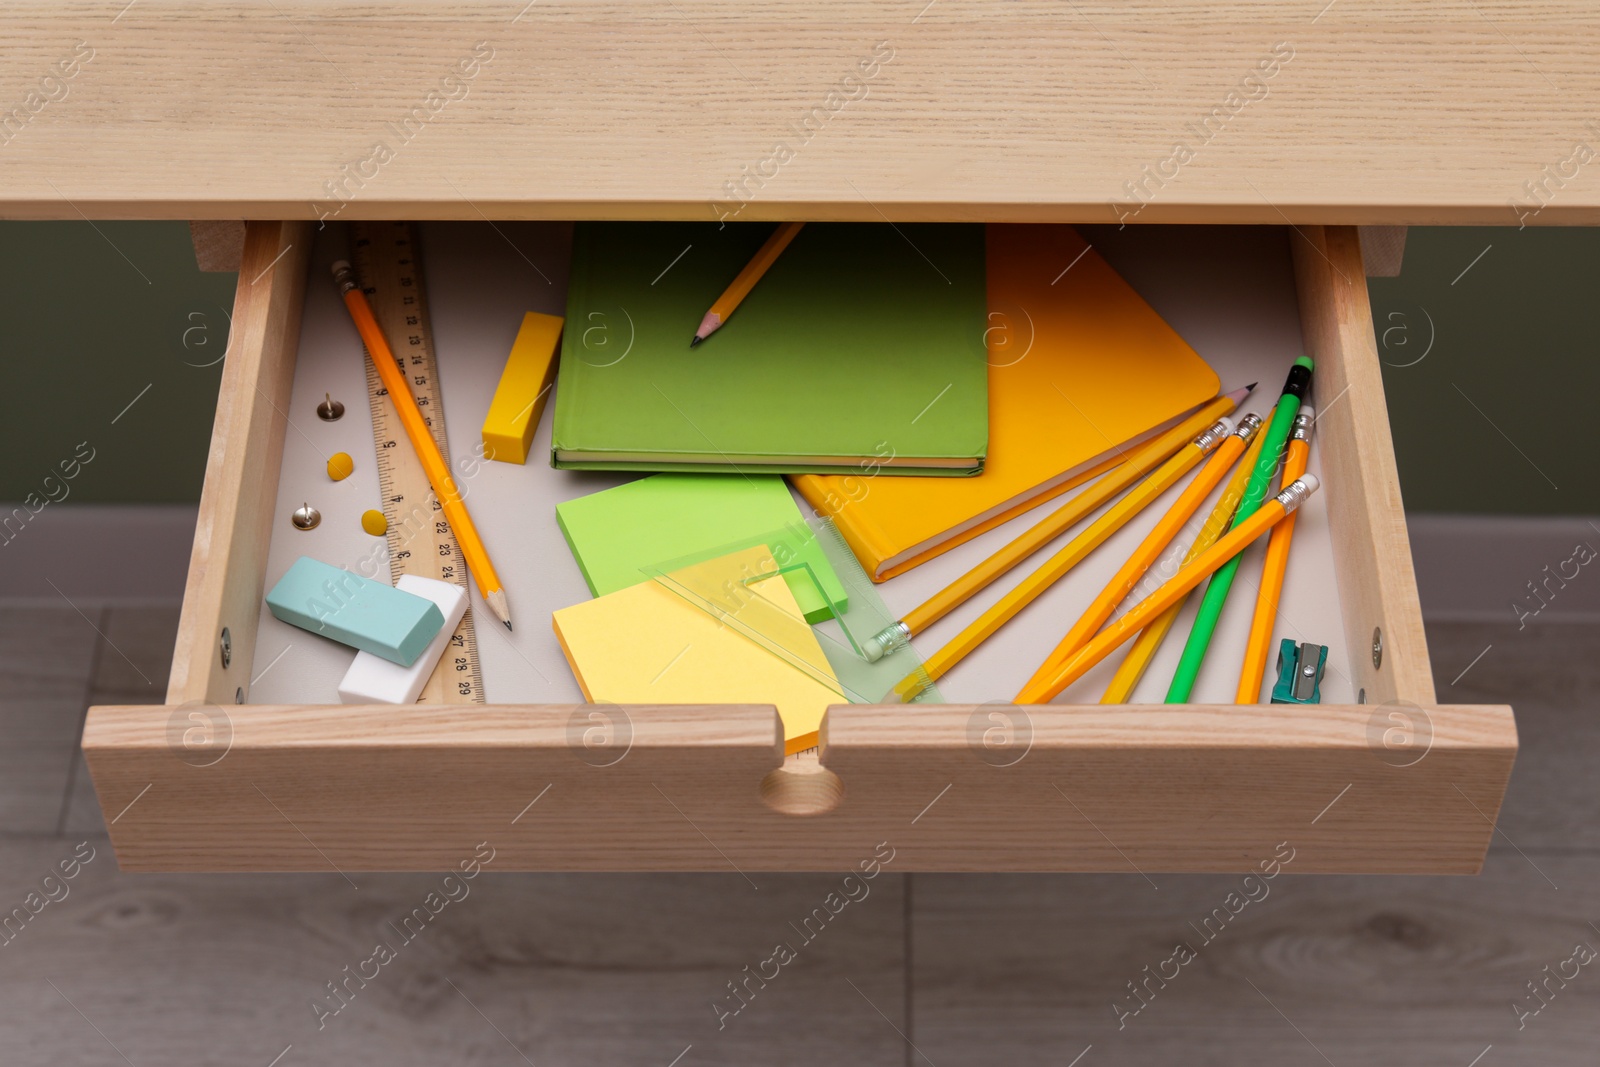 Photo of Office supplies in open desk drawer indoors